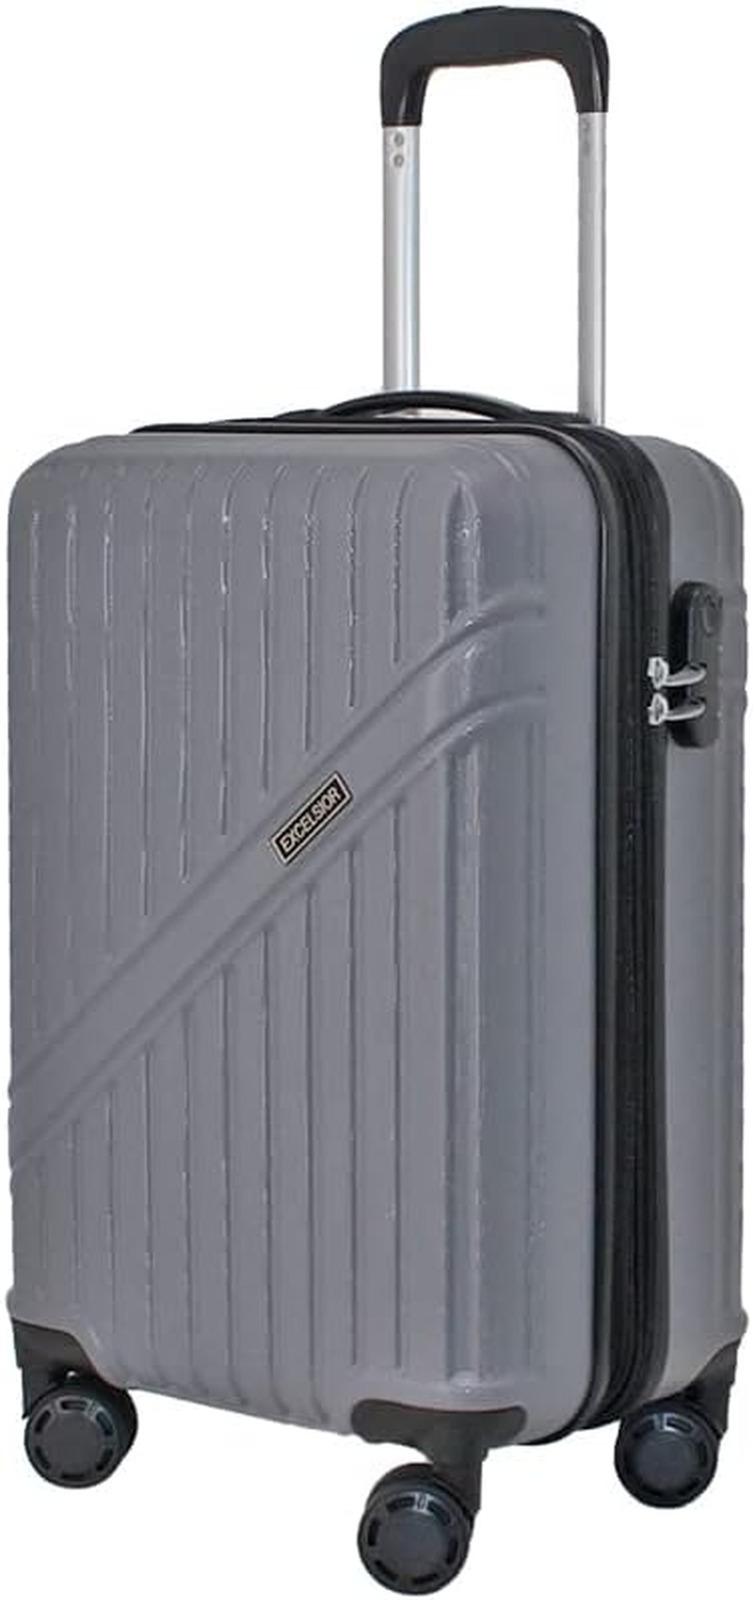 EXCELSIOR Practical PC+ABS Suitcase Spinner Wheels Scratch-Resistant Lightweight